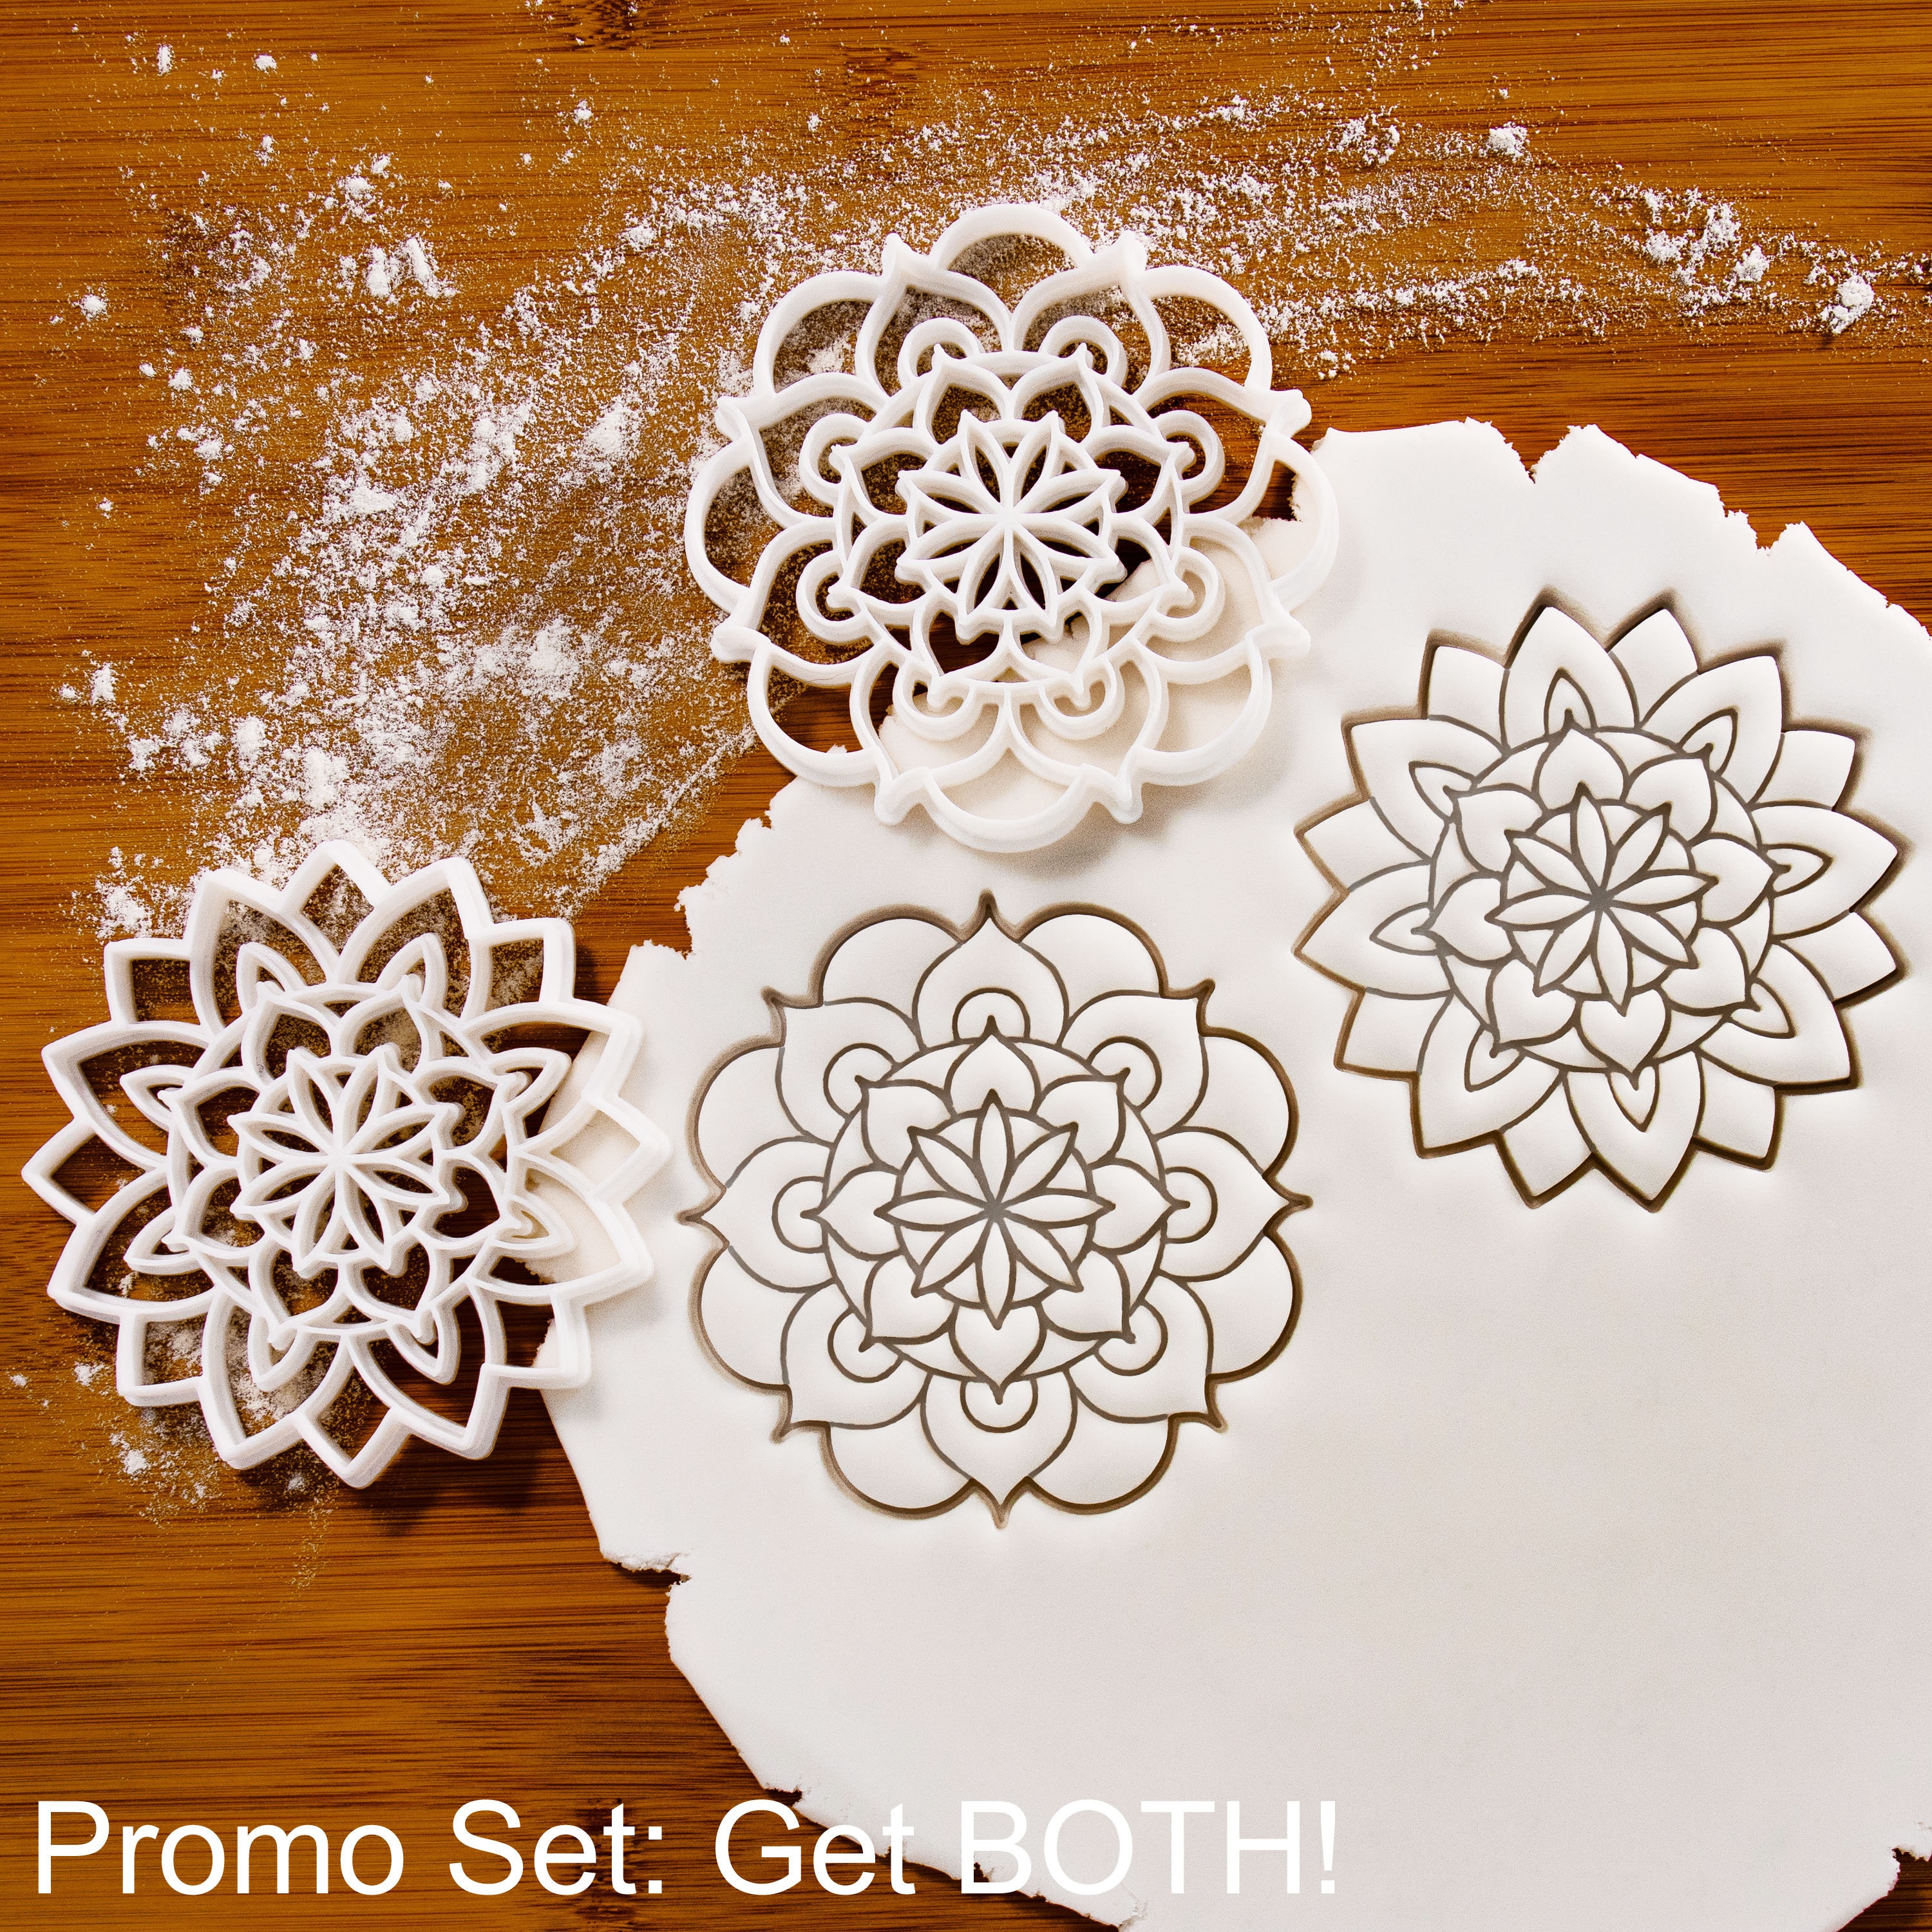 Mandala 2 cookie cutter geometric symbolic representation of the universe with an inner and outer world